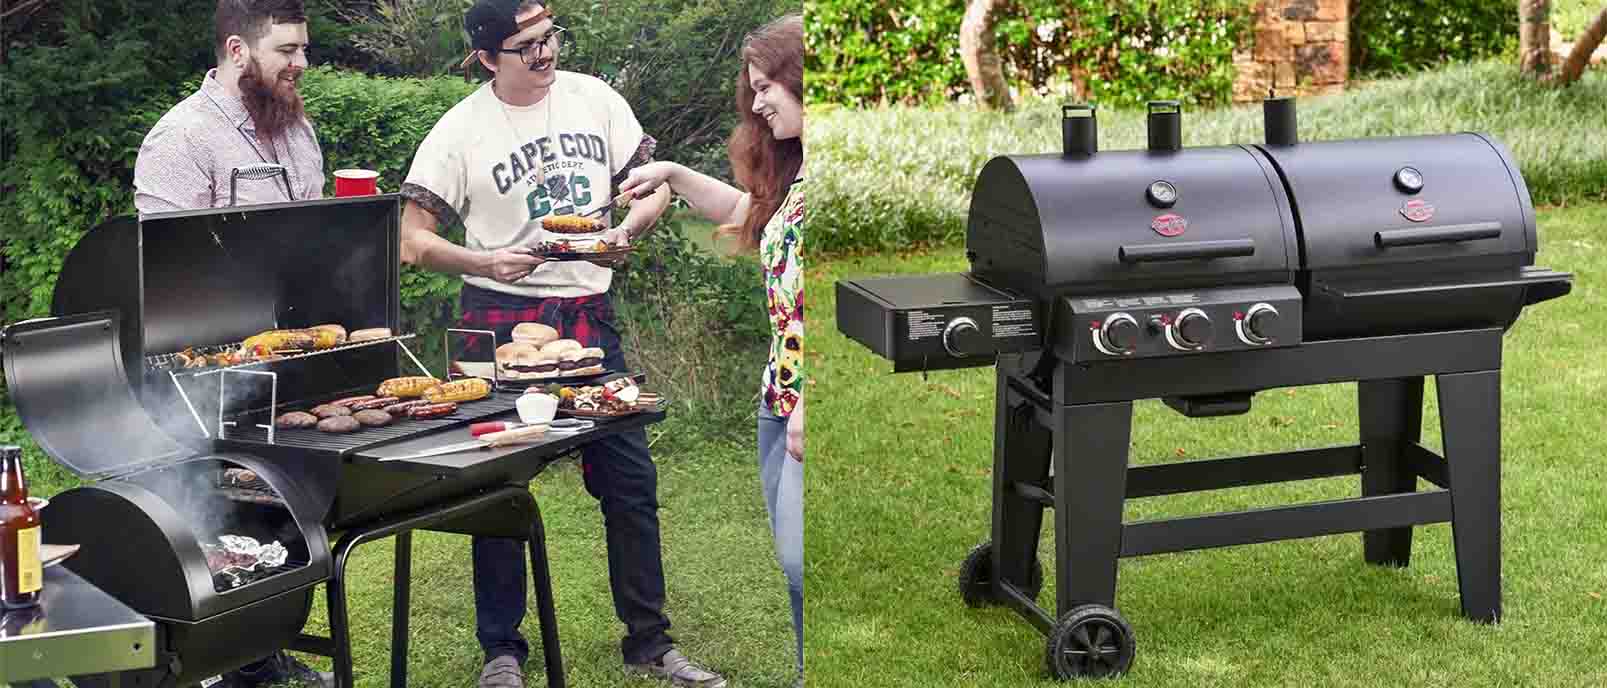 Image of people at outdoor barbeque and a charcoal barbeque grill